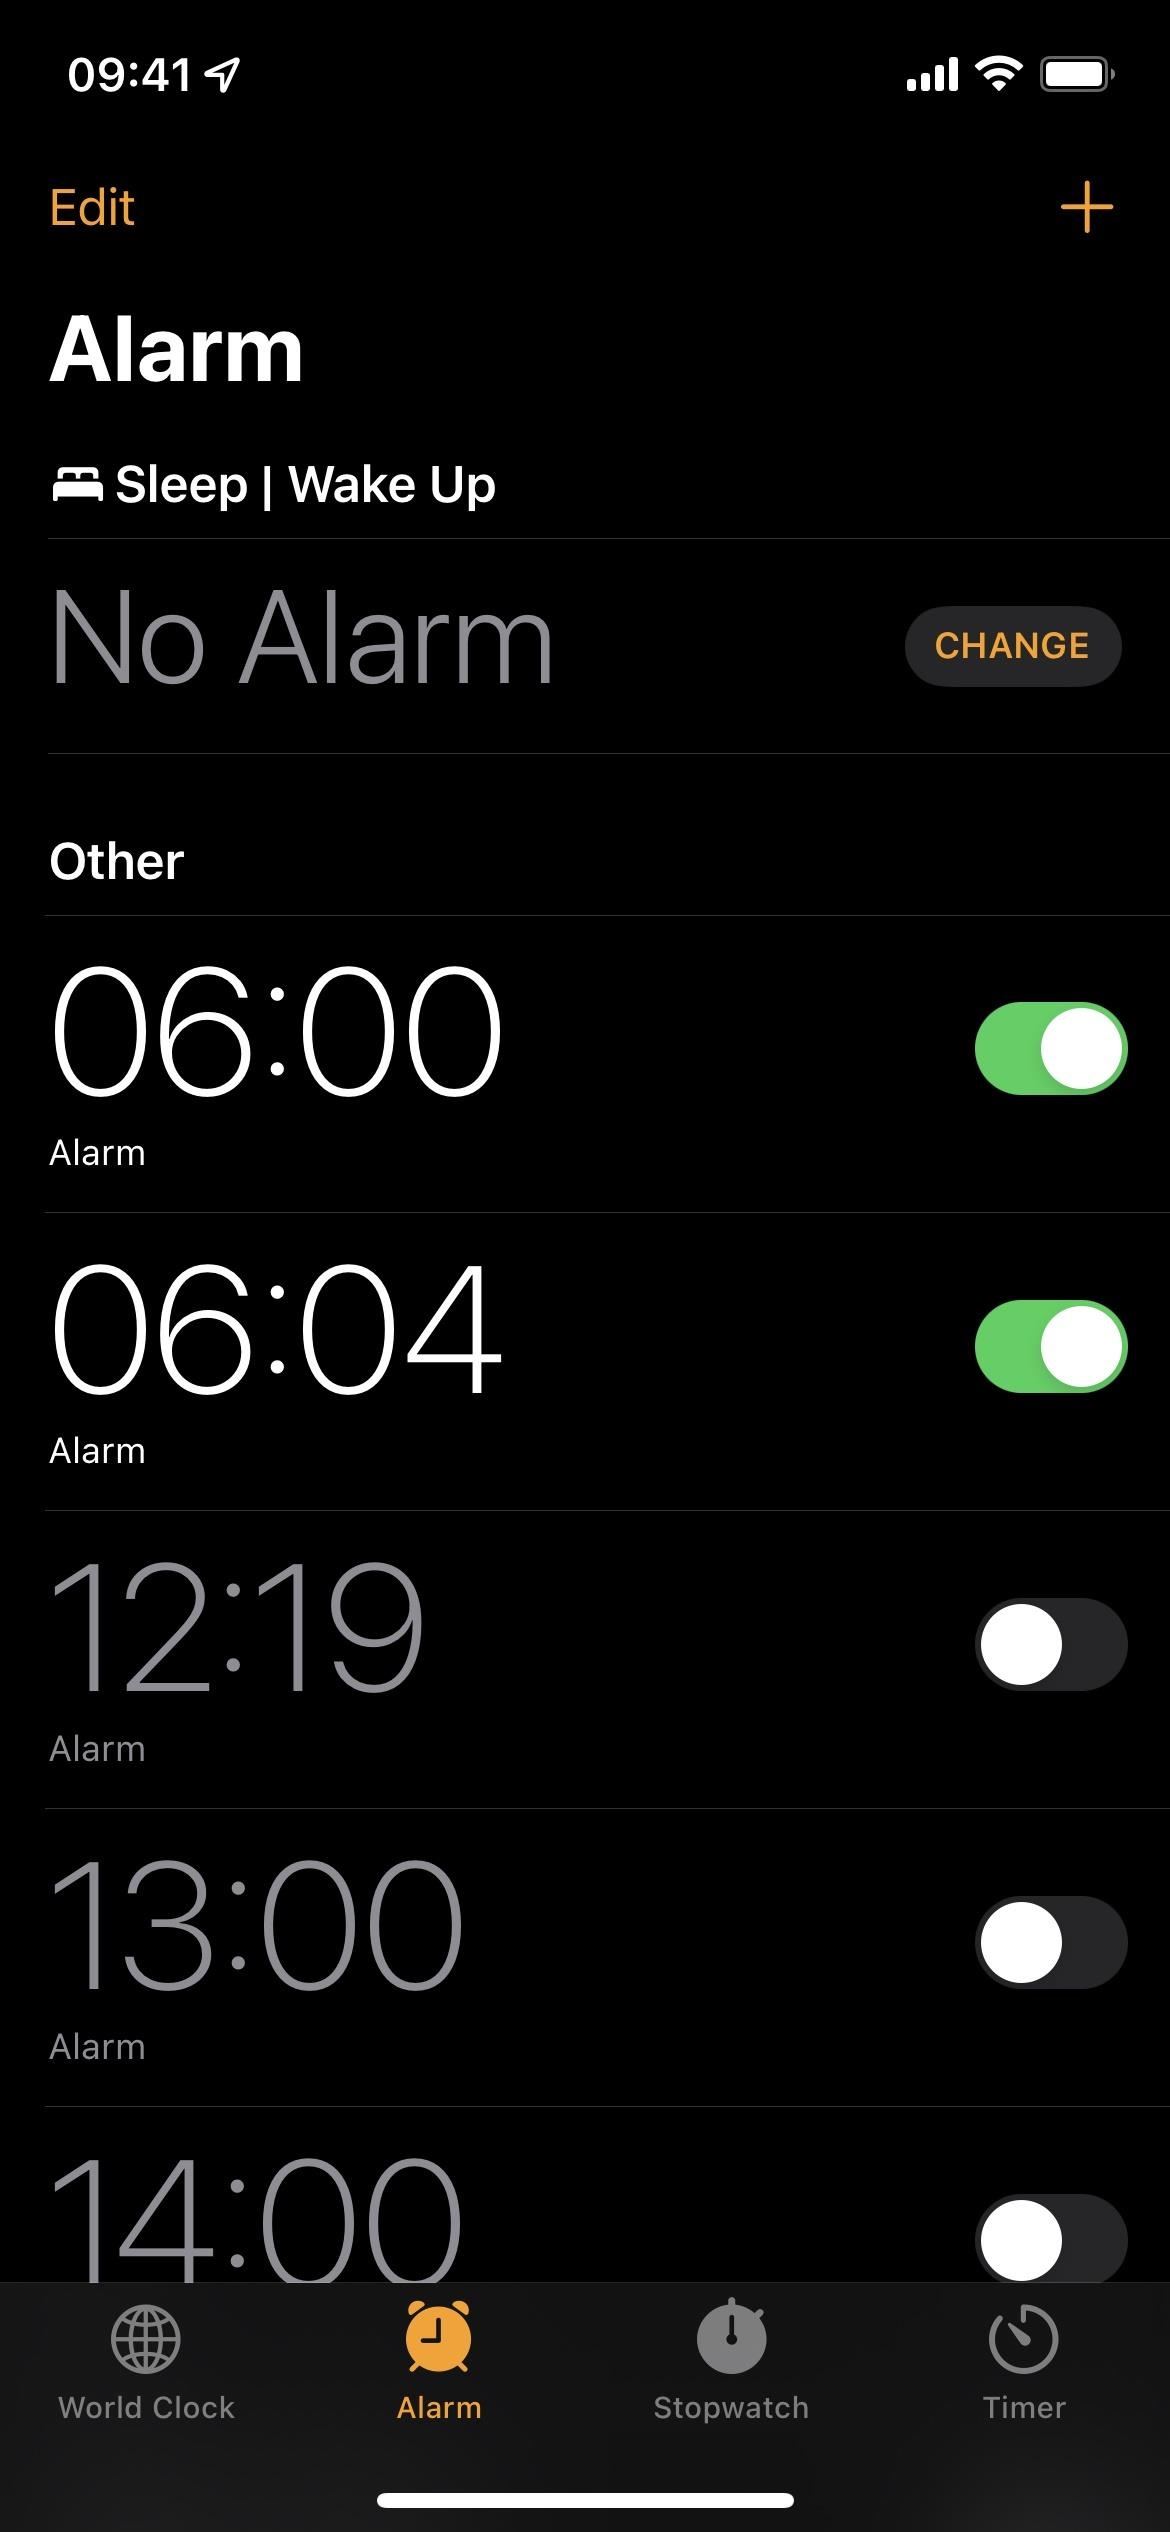 How to Change the Default Snooze Time on Your iPhone's Alarm Clock